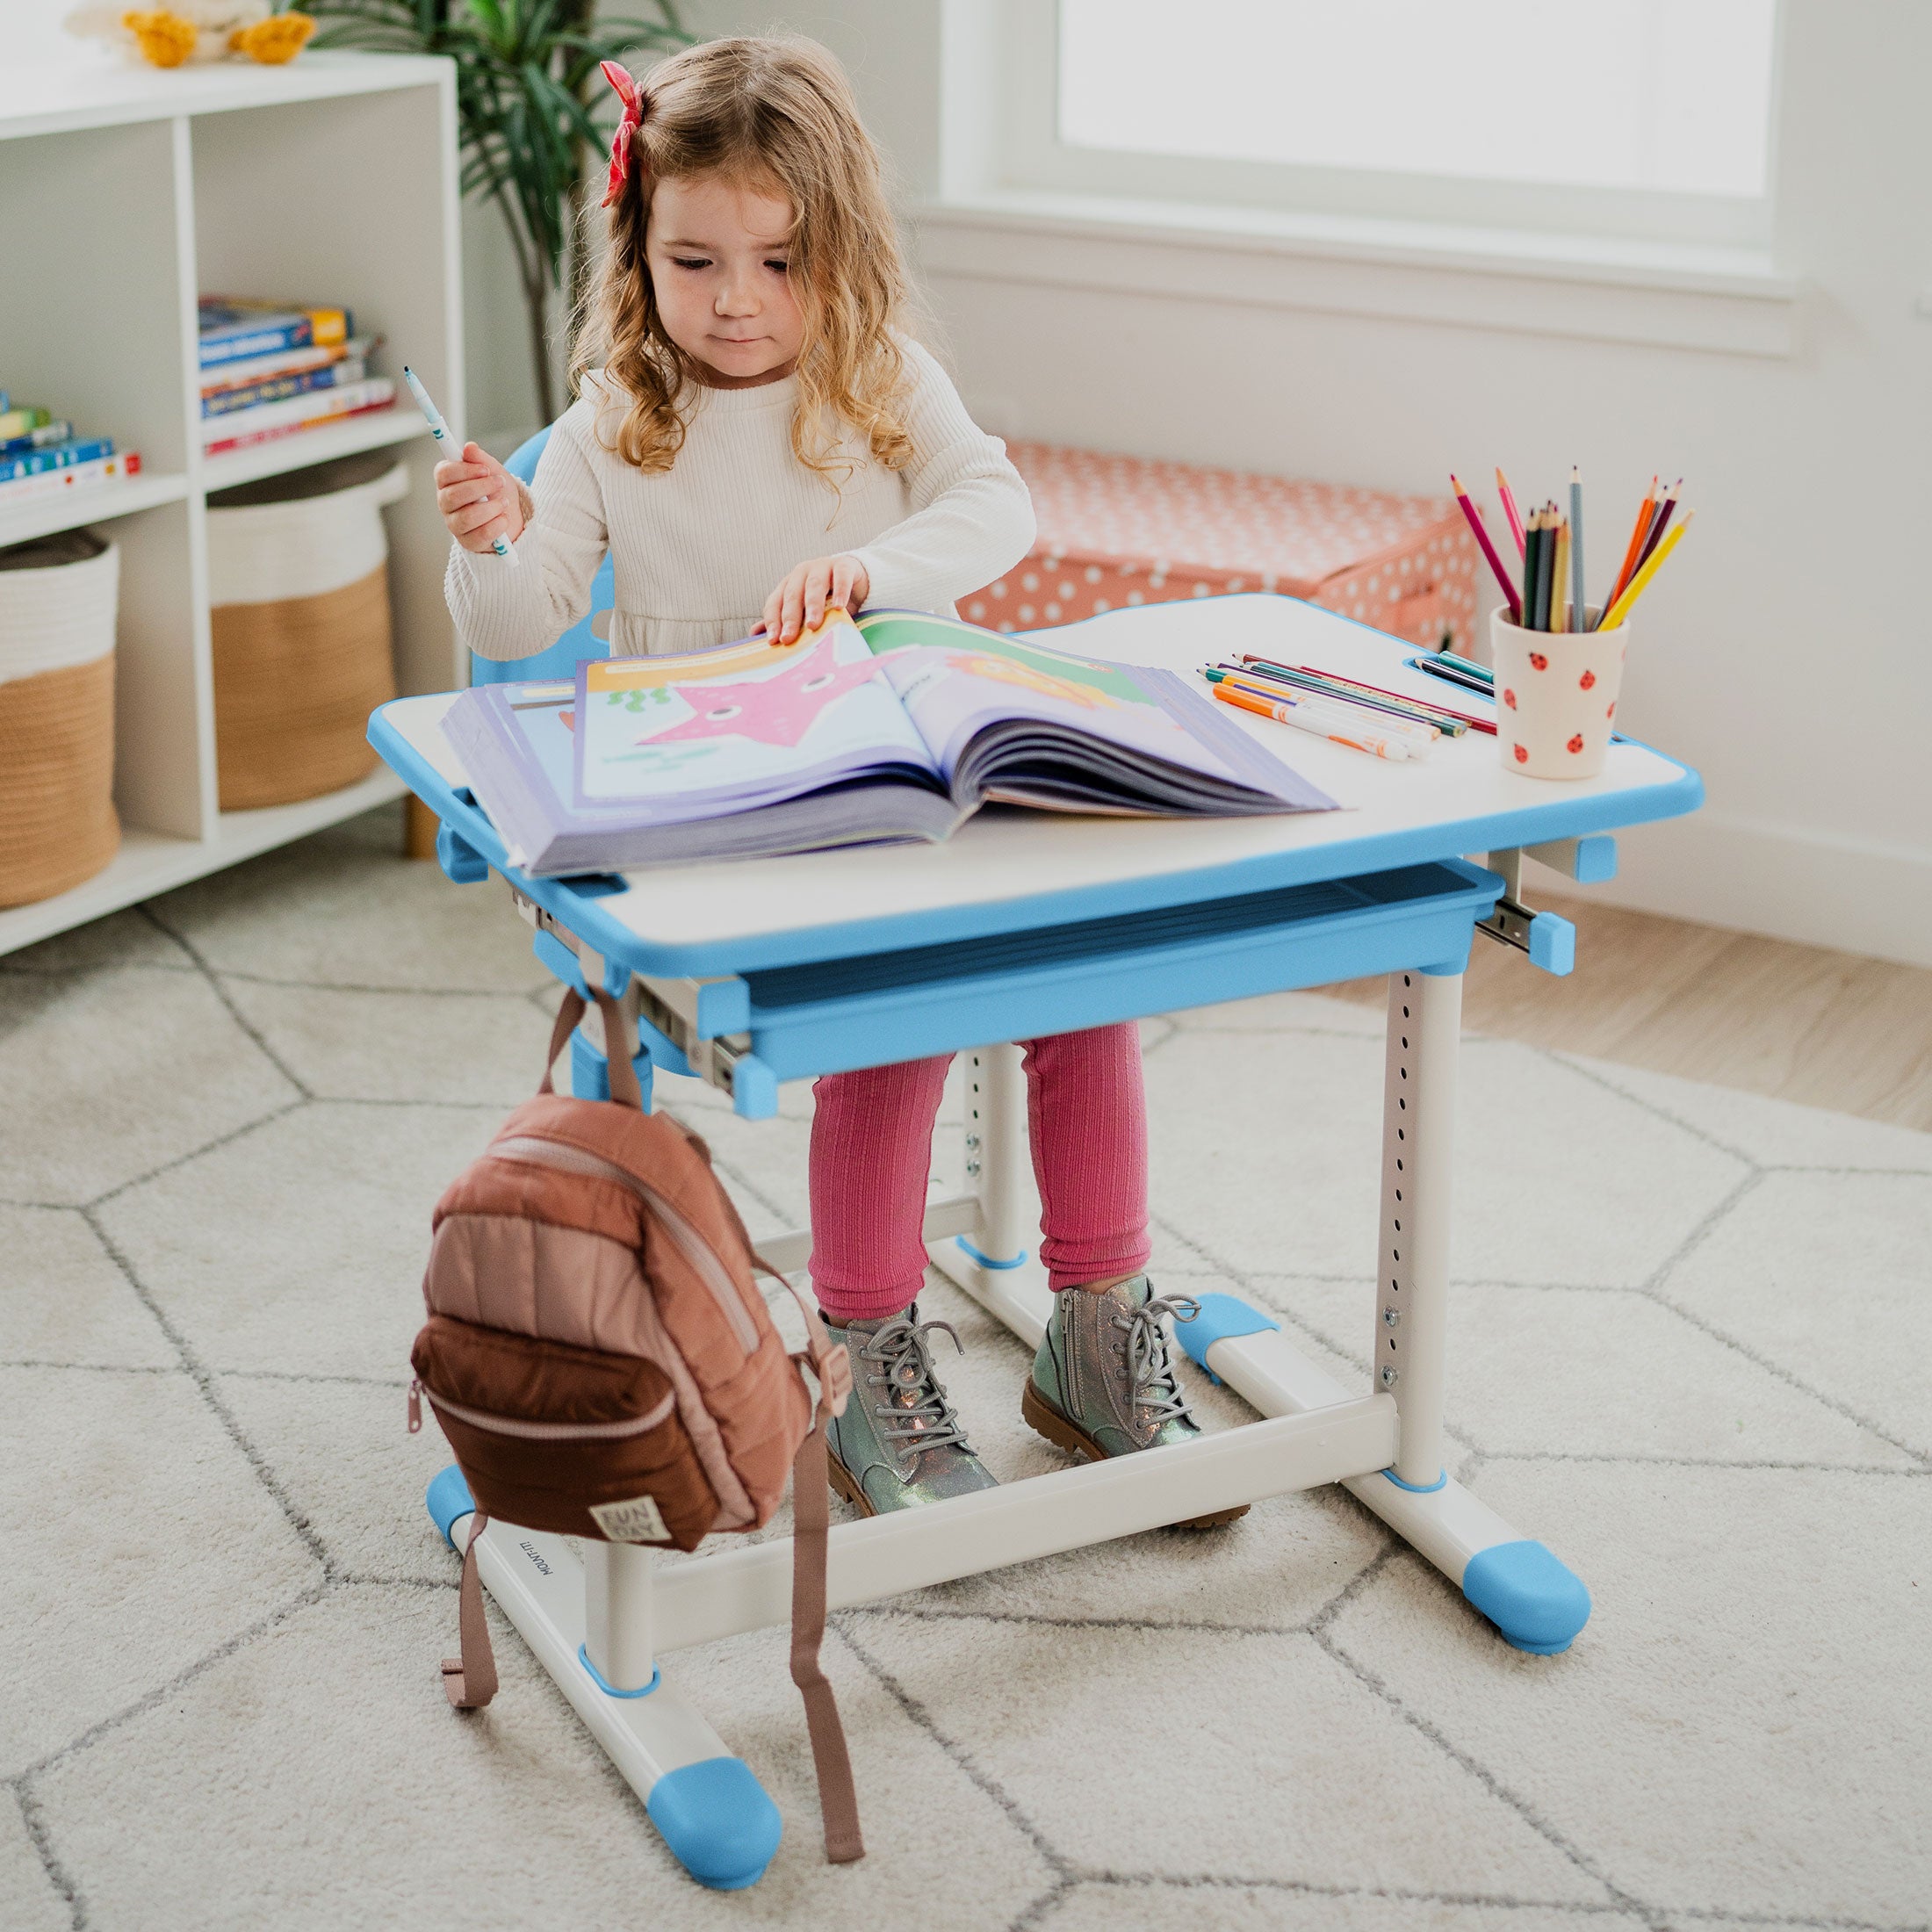 Learning Desk And Chair For Kids/kids study table - Table For Kids, Study  Table For Kids, Kid's Reading Table